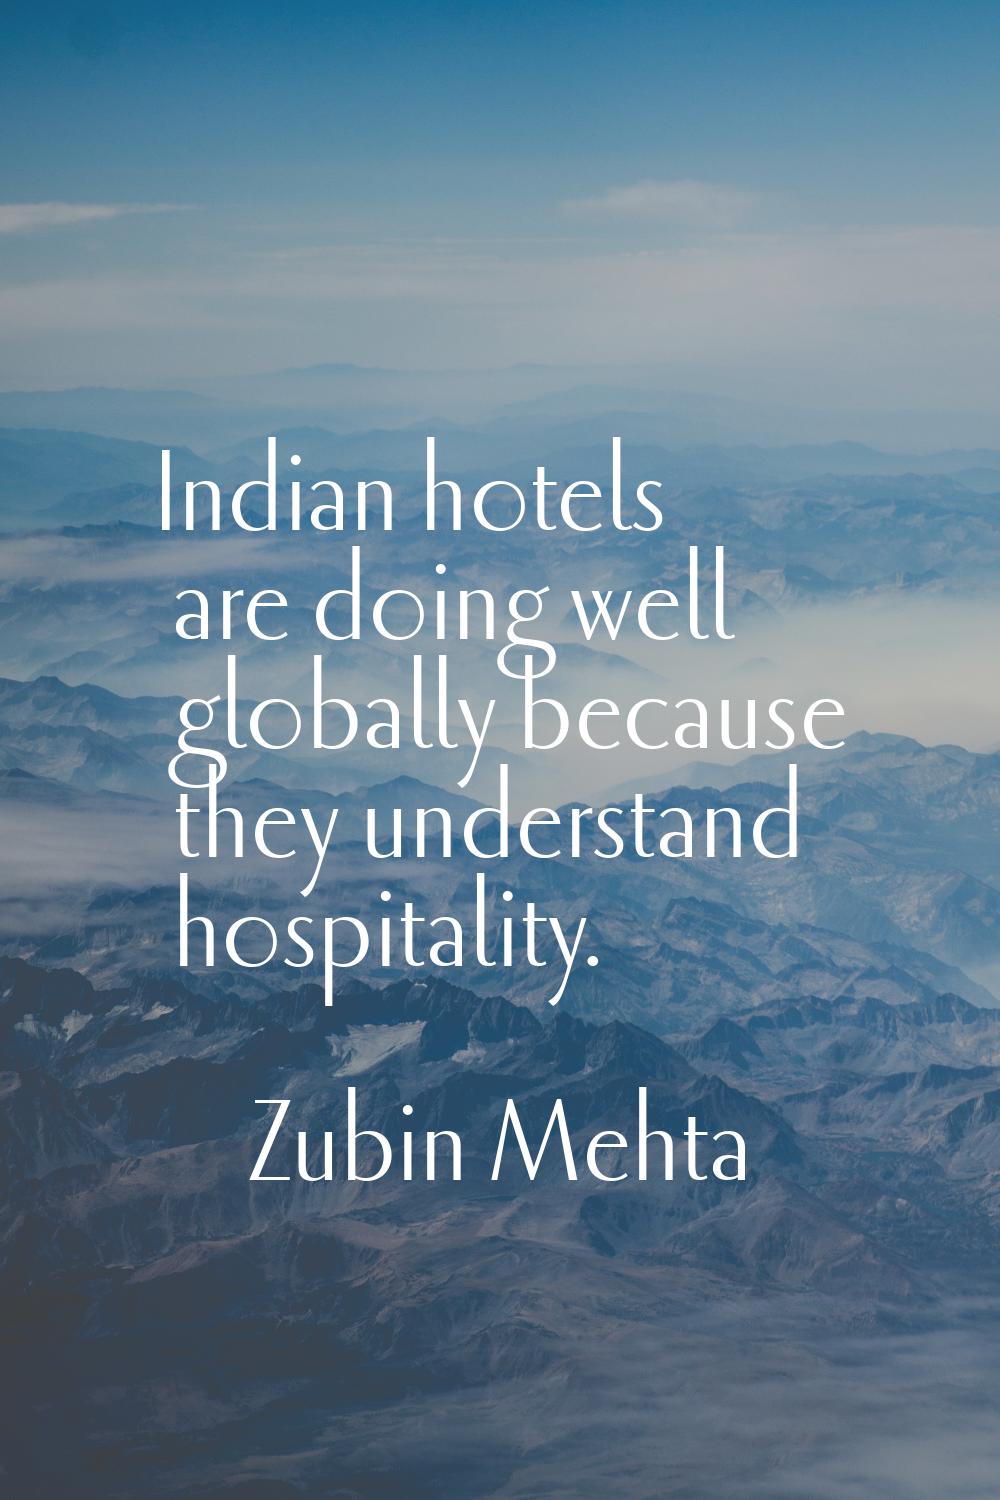 Indian hotels are doing well globally because they understand hospitality.